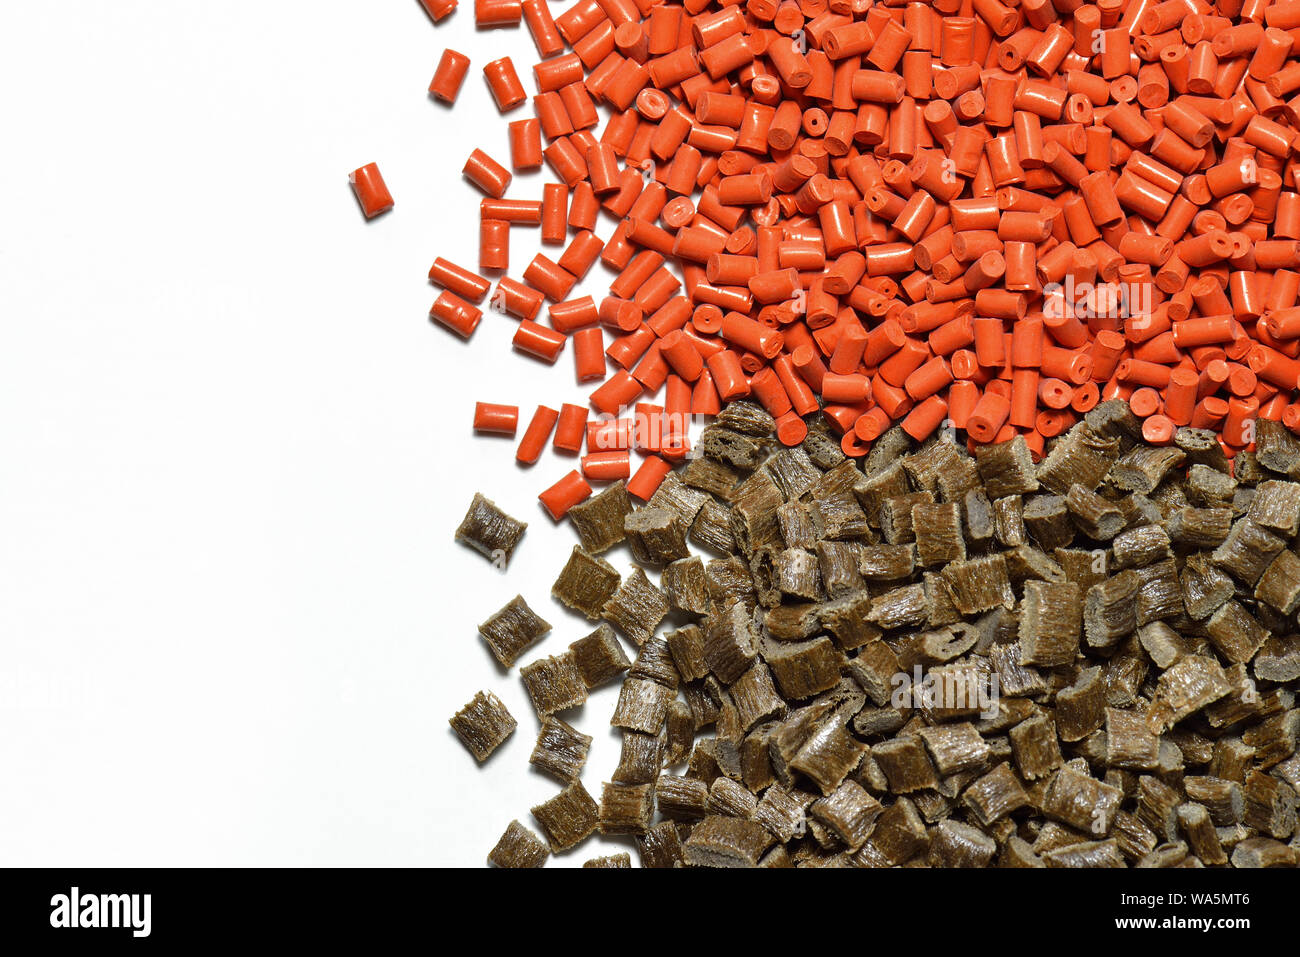 red and brown polymer resin. Pellets for injection moulding process in plastic industry. Stock Photo